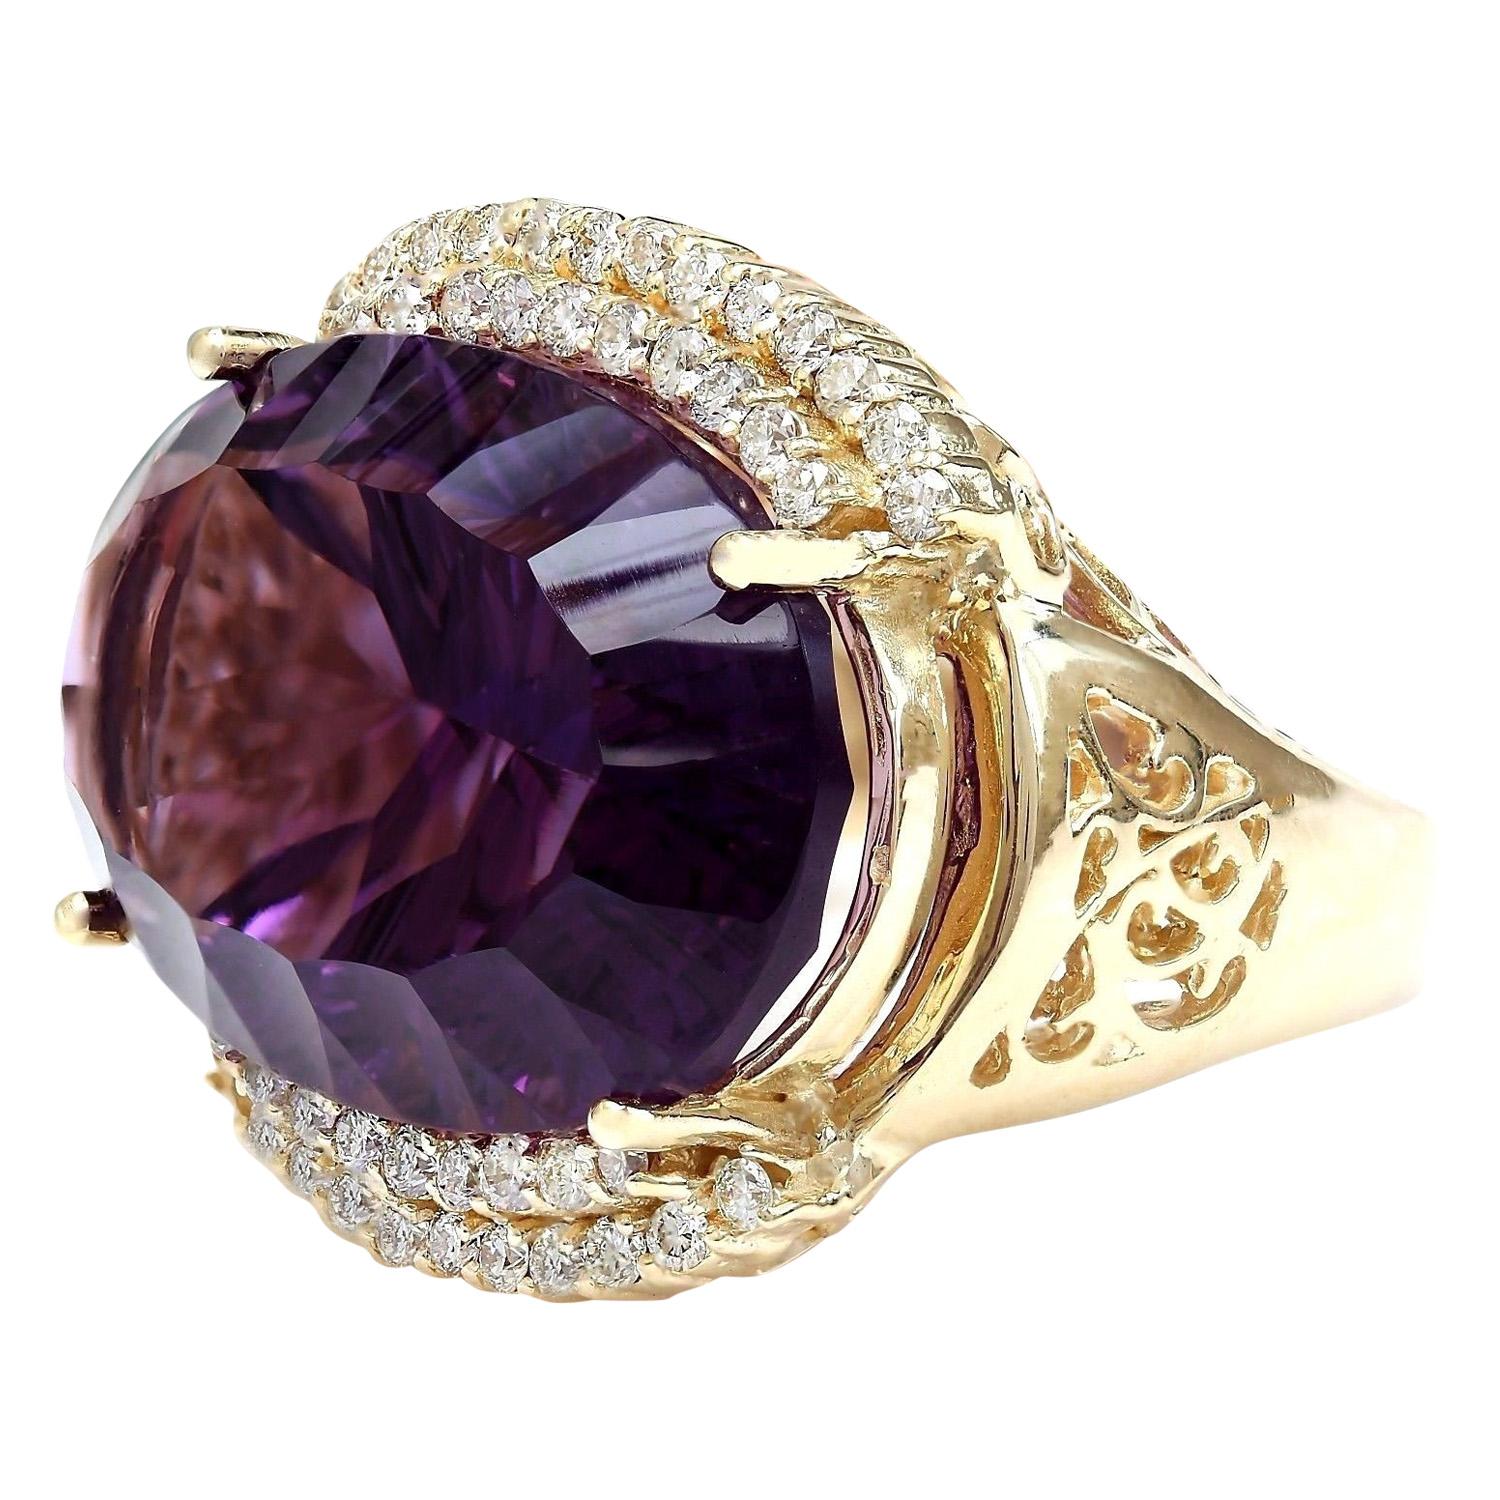 36.79 Carat Natural Amethyst 14K Solid Yellow Gold Diamond Ring
 Item Type: Ring
 Item Style: Cocktail
 Material: 14K Yellow Gold
 Mainstone: Amethyst
 Stone Color: Purple
 Stone Weight: 35.79 Carat
 Stone Shape: Oval
 Stone Quantity: 1
 Stone